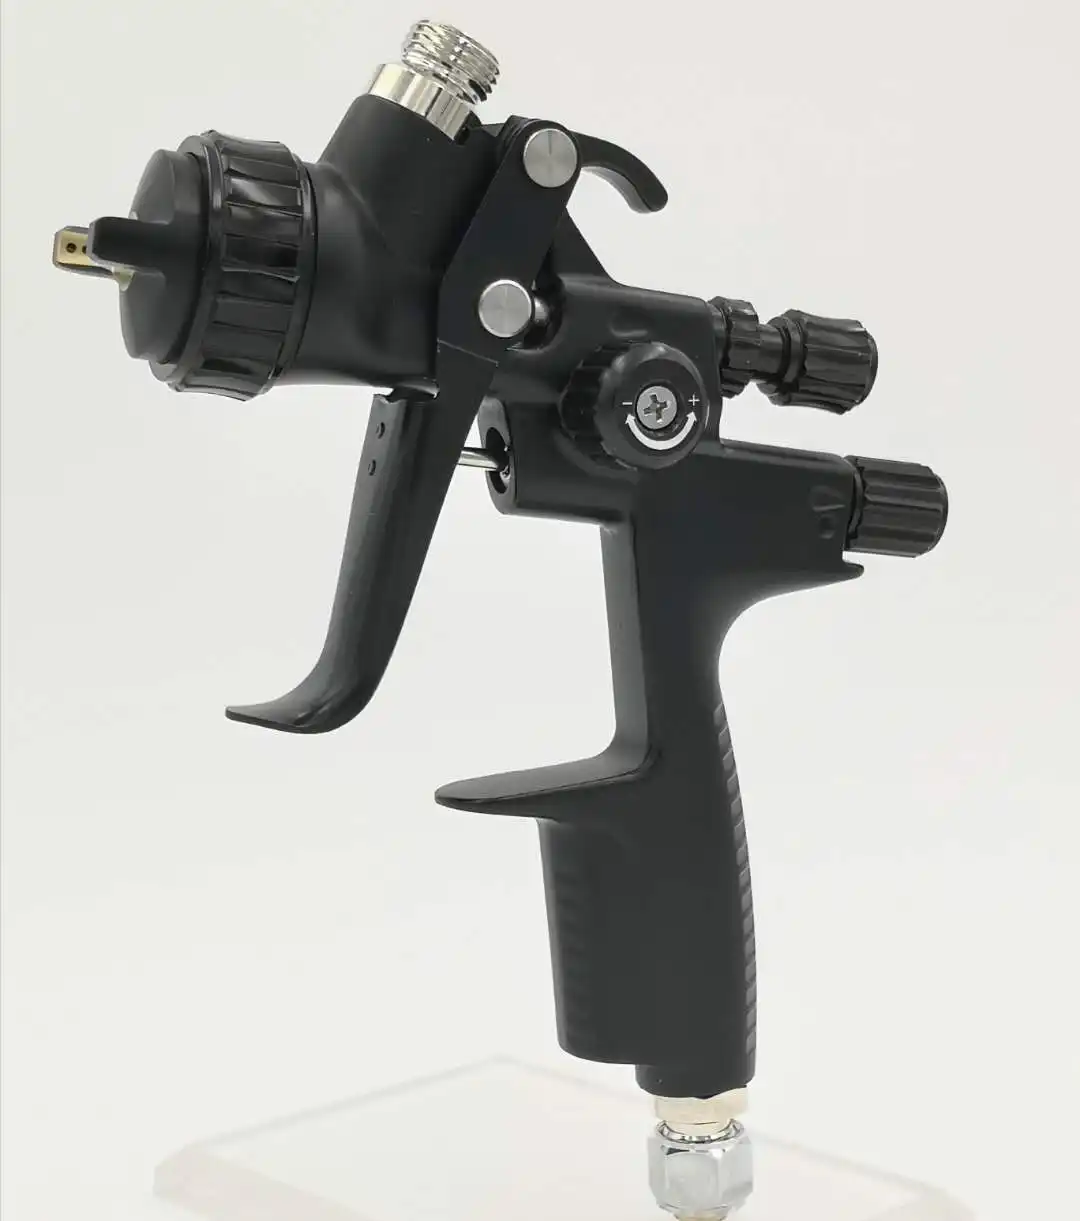 @air tool car body care refinish Bodywork Painting Hvlp rp gravity feed Paint Spray Guns with 1.3 1.4 mm nozzle cup